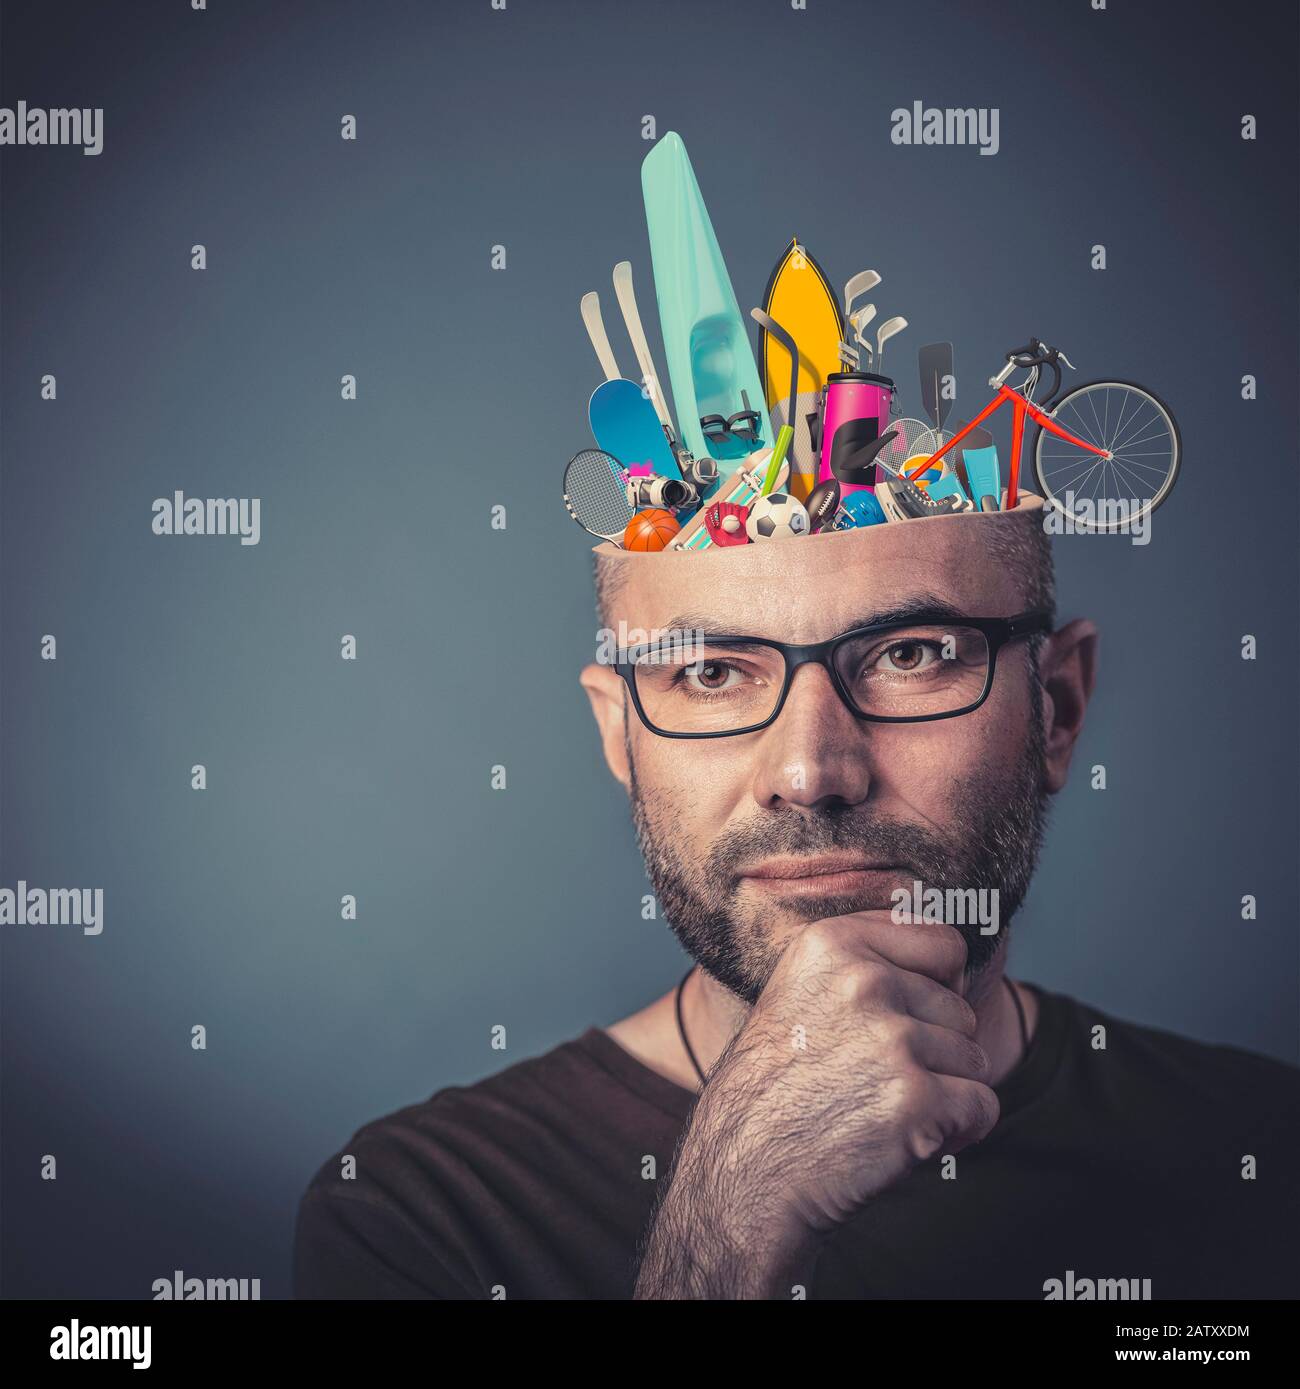 Portrait of man with glasses and hand on chin. Thoughtful look. Caucasian with short hair, studio shot. Stock Photo